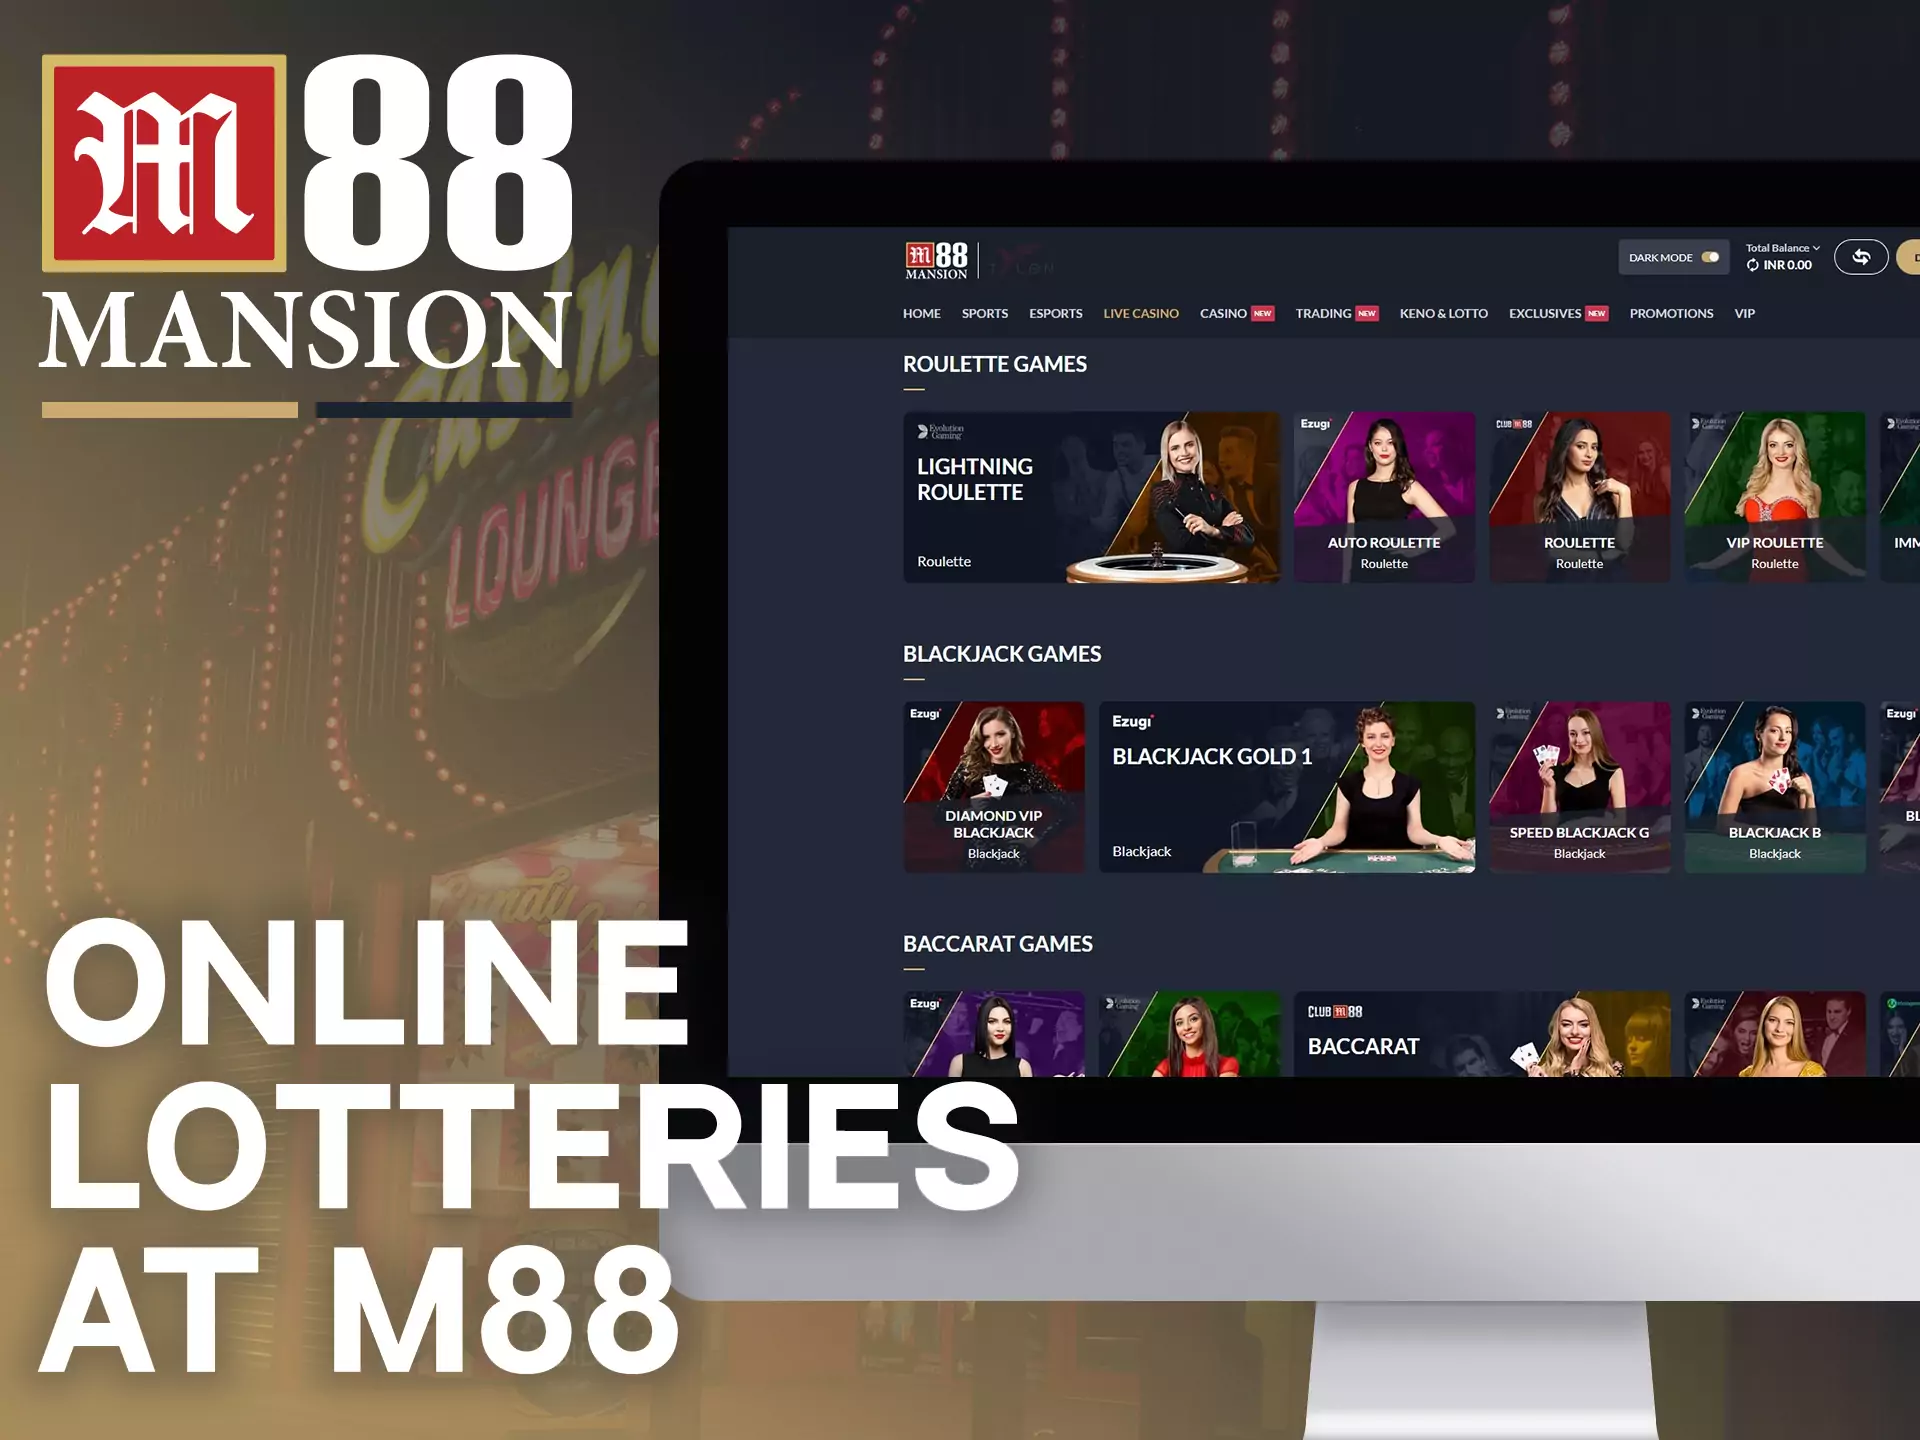 Check your intuition playing lotteries on the M88 website.